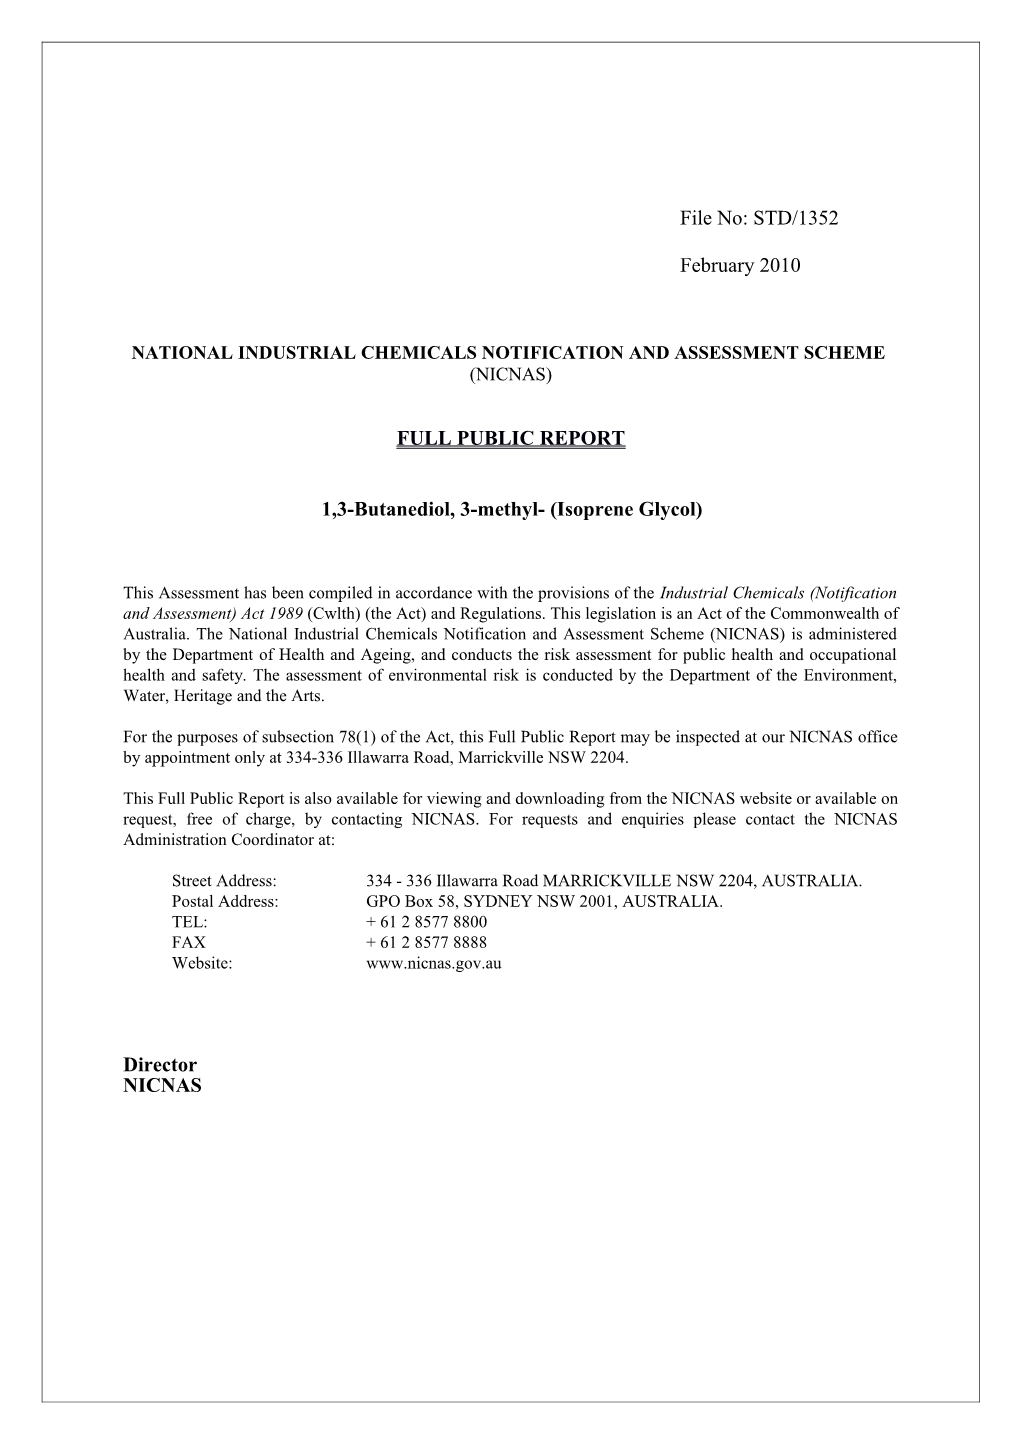 National Industrial Chemicals Notification and Assessment Scheme s11